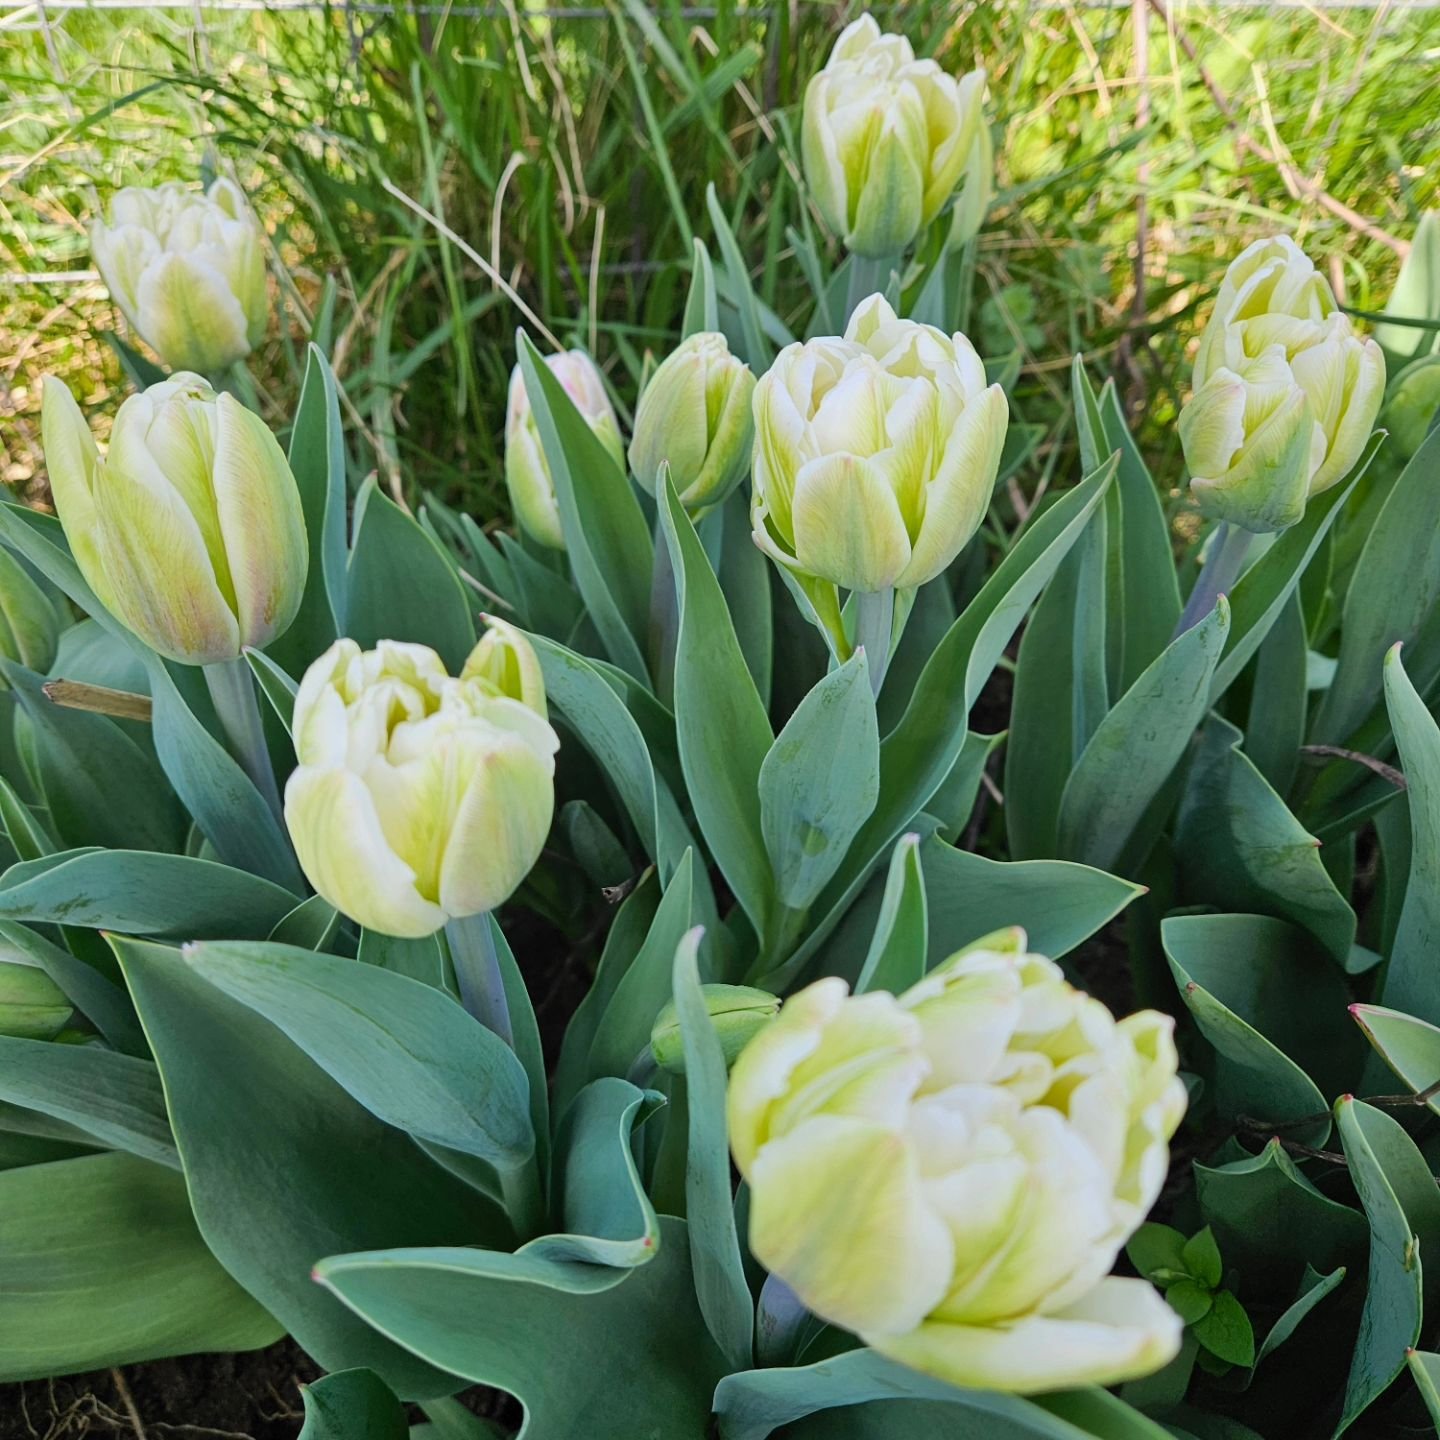 Tulips and daffodils are here! 

You'll be able to grab a bunch at the Sandbar Cafe this Saturday (4/20). It will be a great morning to treat yourself at the Caf&eacute; 🌷 ☕️ 🍪

Straight tulip bunches are 1 for $20 or 2 for $30.  Fancy Daff bunches